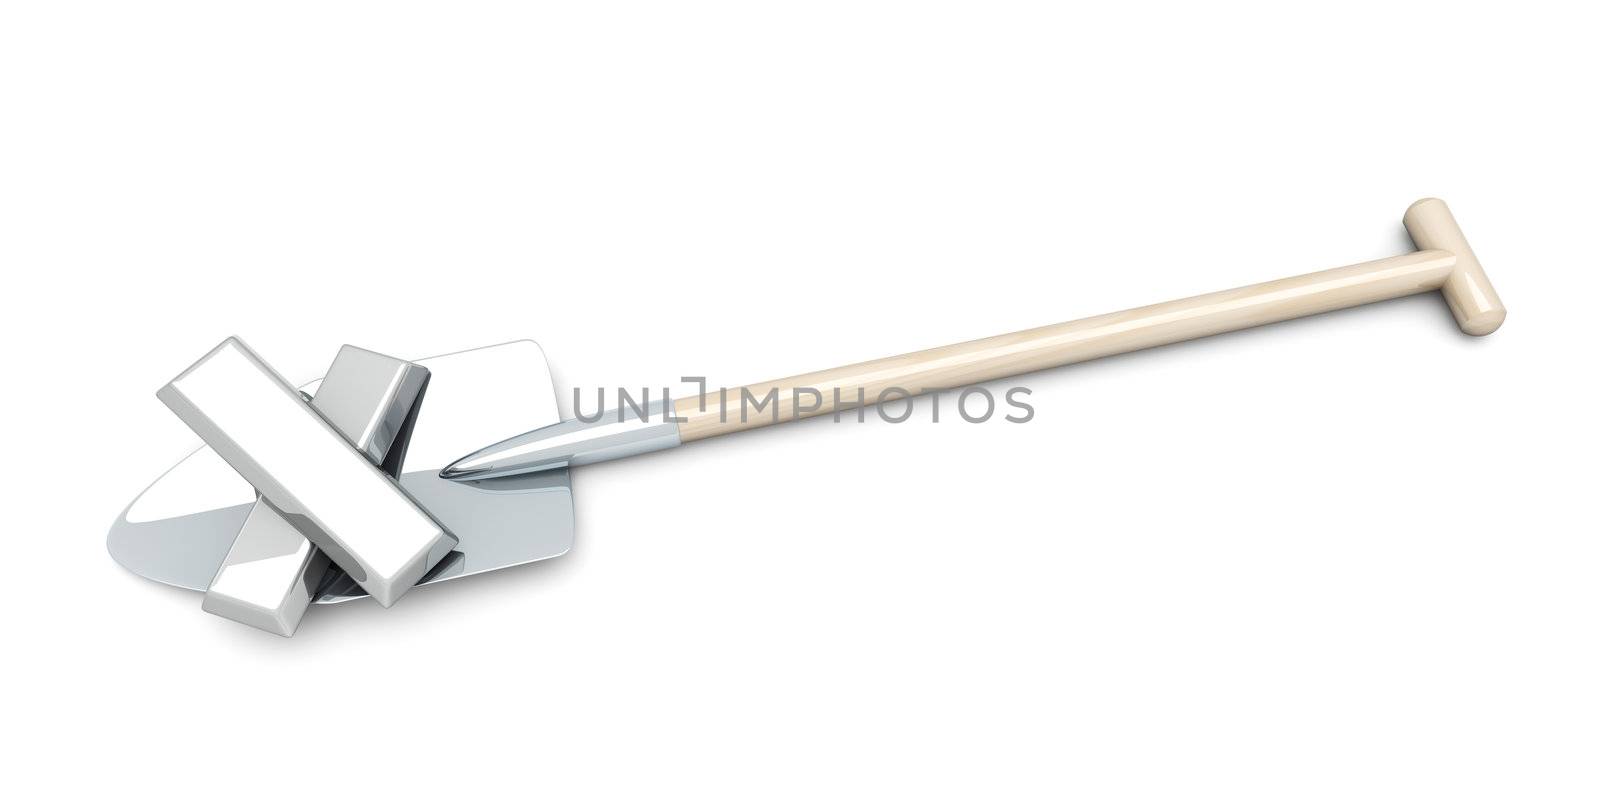 3D rendered Illustration. Isolated on white. Digging out the Silver.